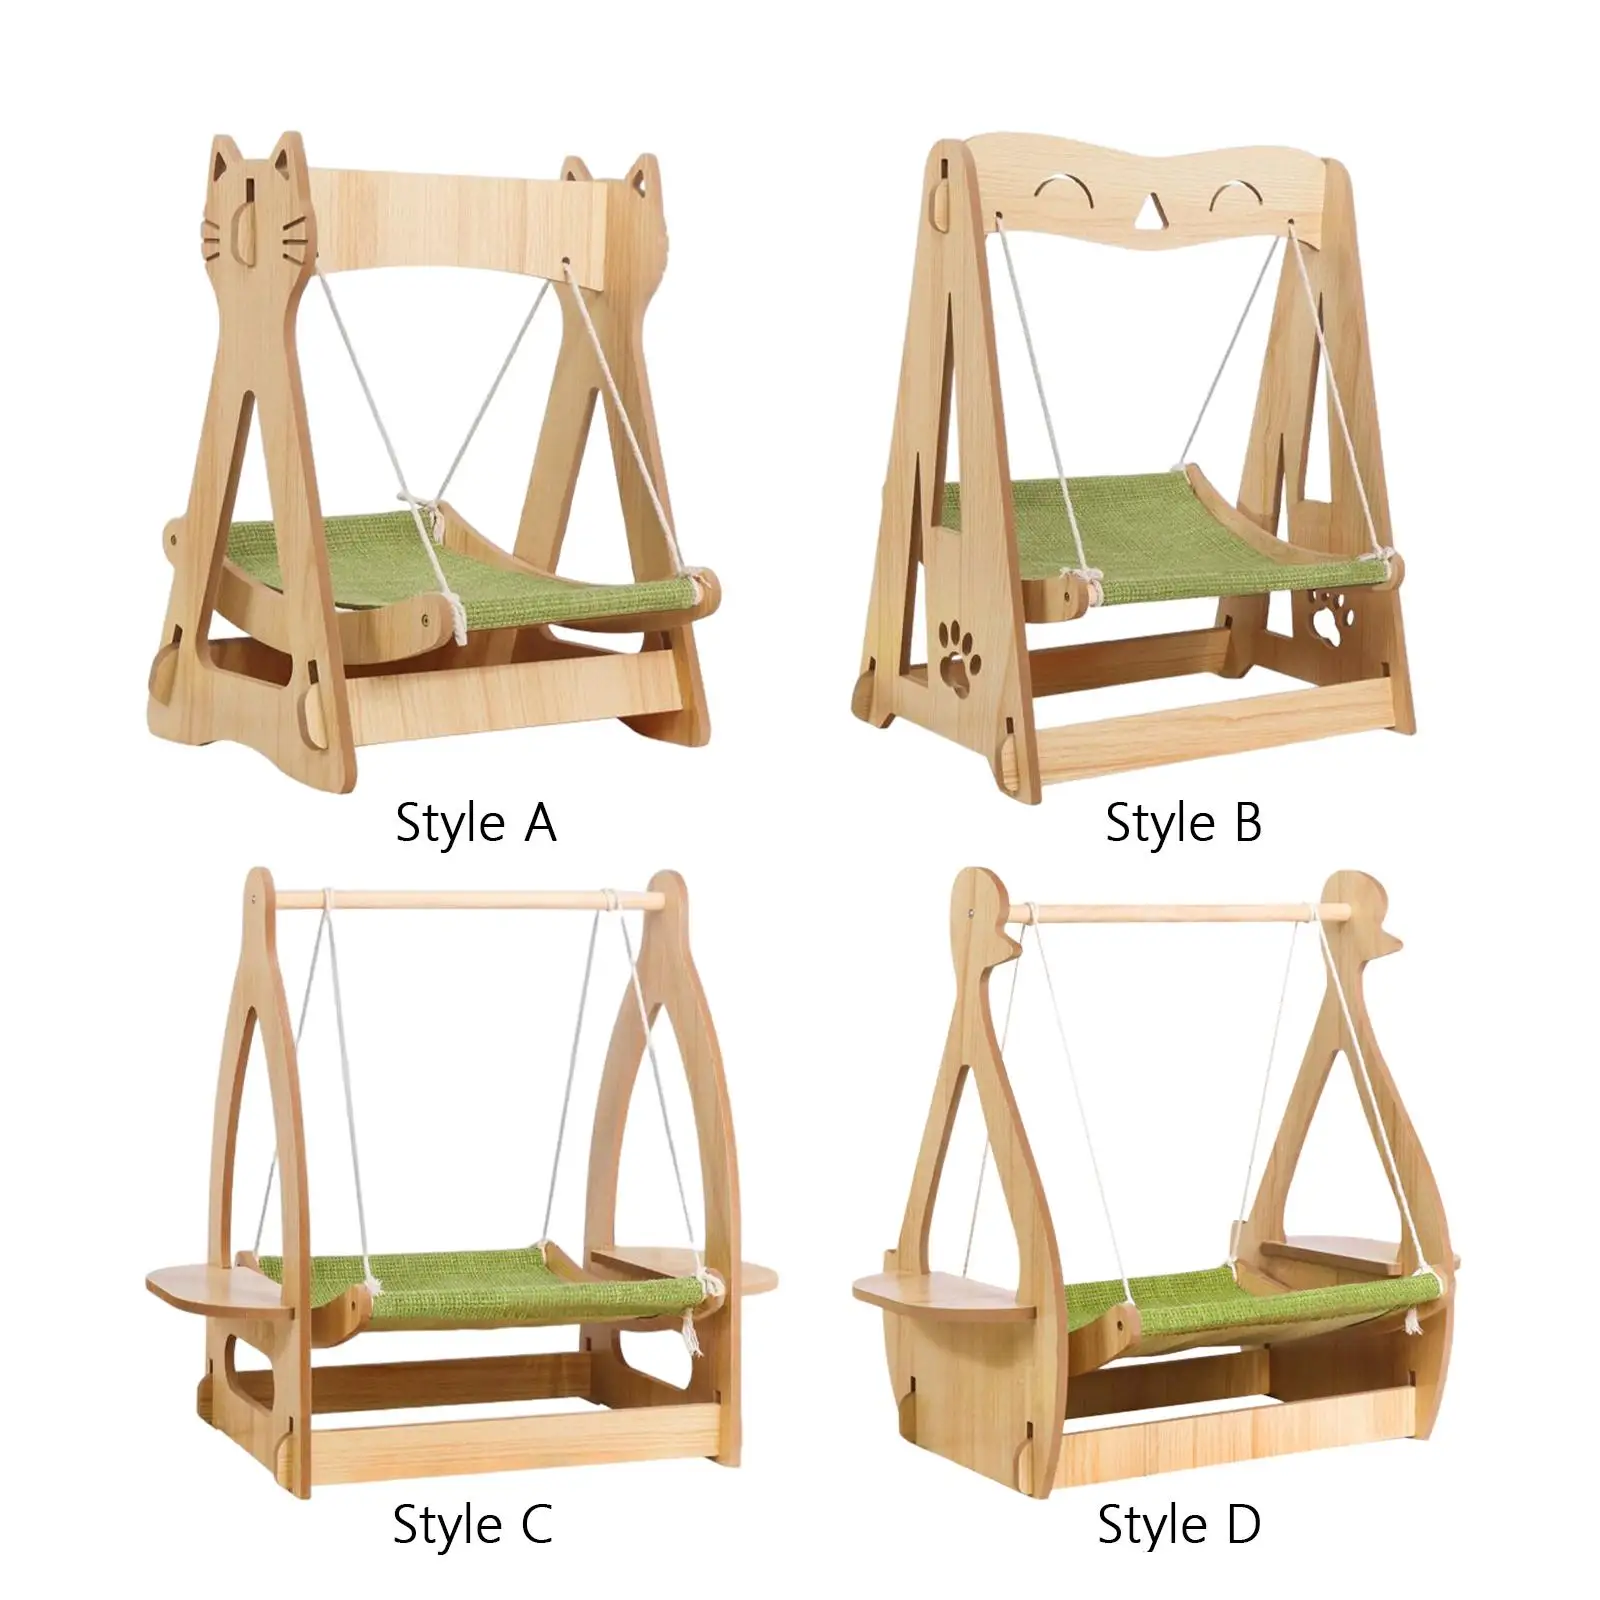 Cat Hammock Lounger Cat Bed Durable Wooden Frame Pet Hanging Swing Elevated Pet Bed Cat Chair for Indoor Cats Easy Assembly